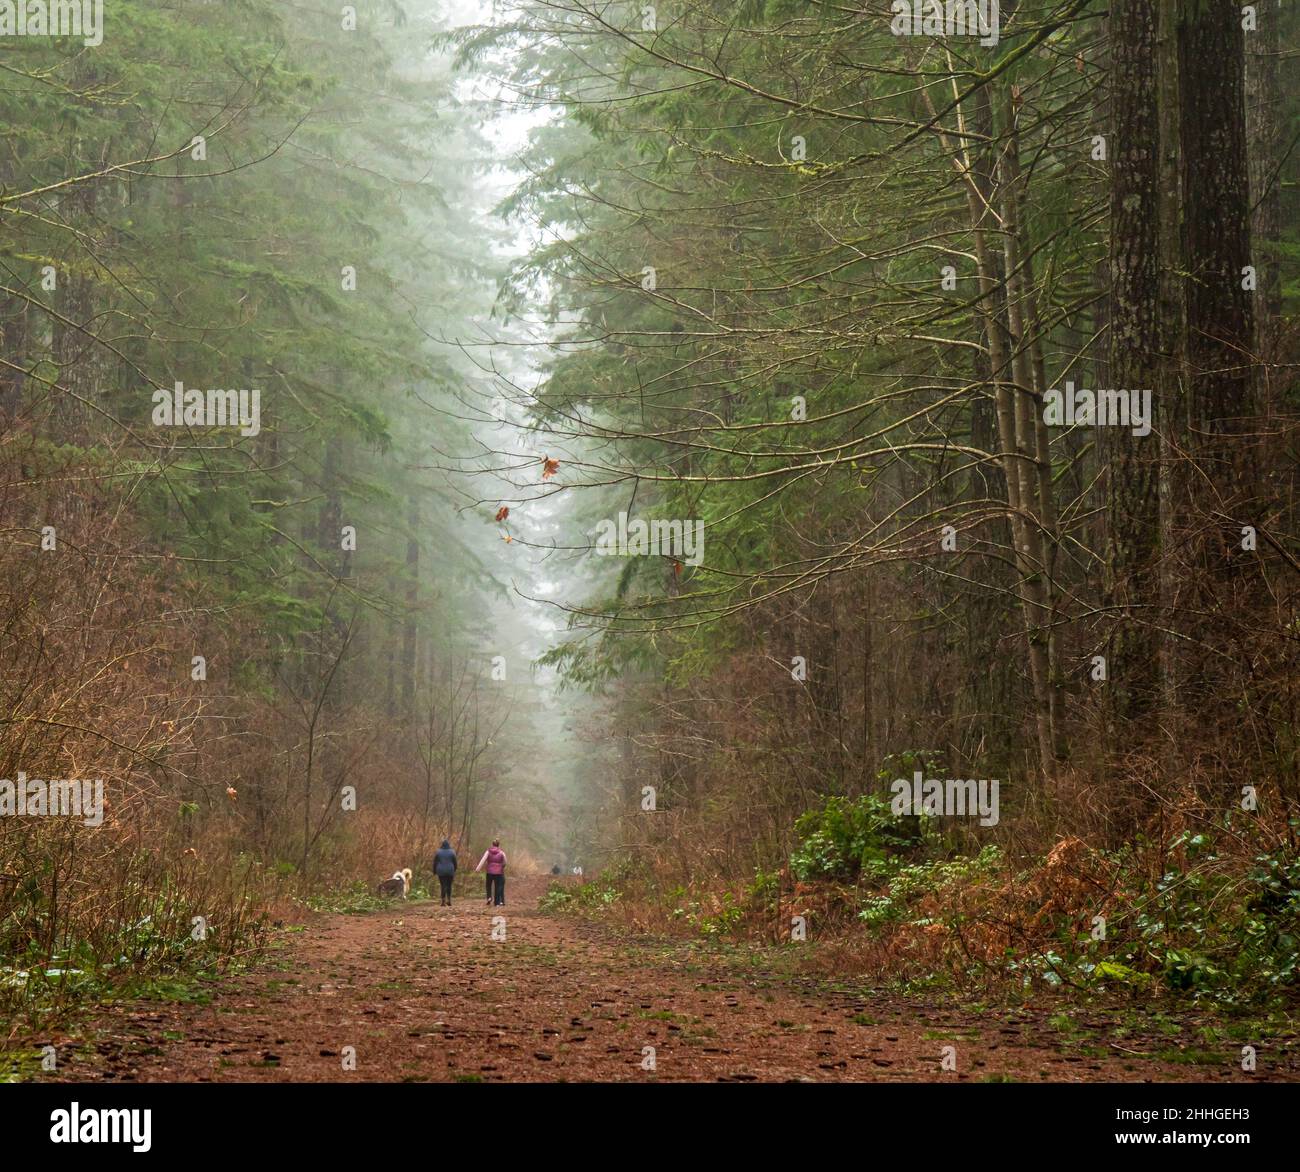 Walking on a forest trail, misty, mysterious, dreamy mood with mist rising through the trees.  Typical British Columbia forest. Stock Photo